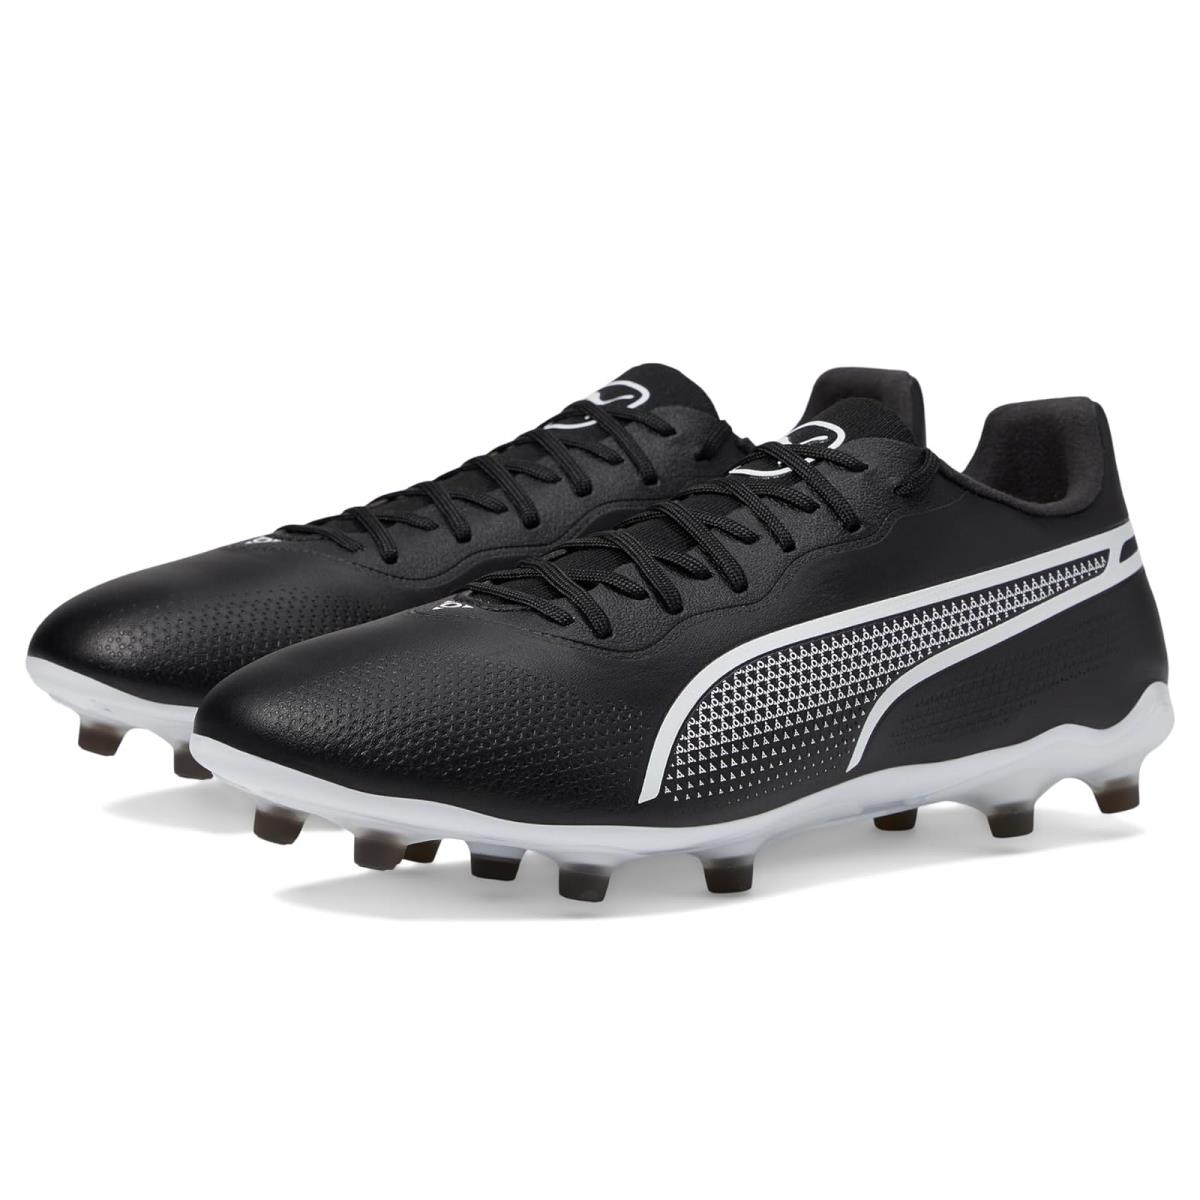 Man`s Sneakers Athletic Shoes Puma King Pro Firm Ground/artificial Ground Puma Black/Puma White